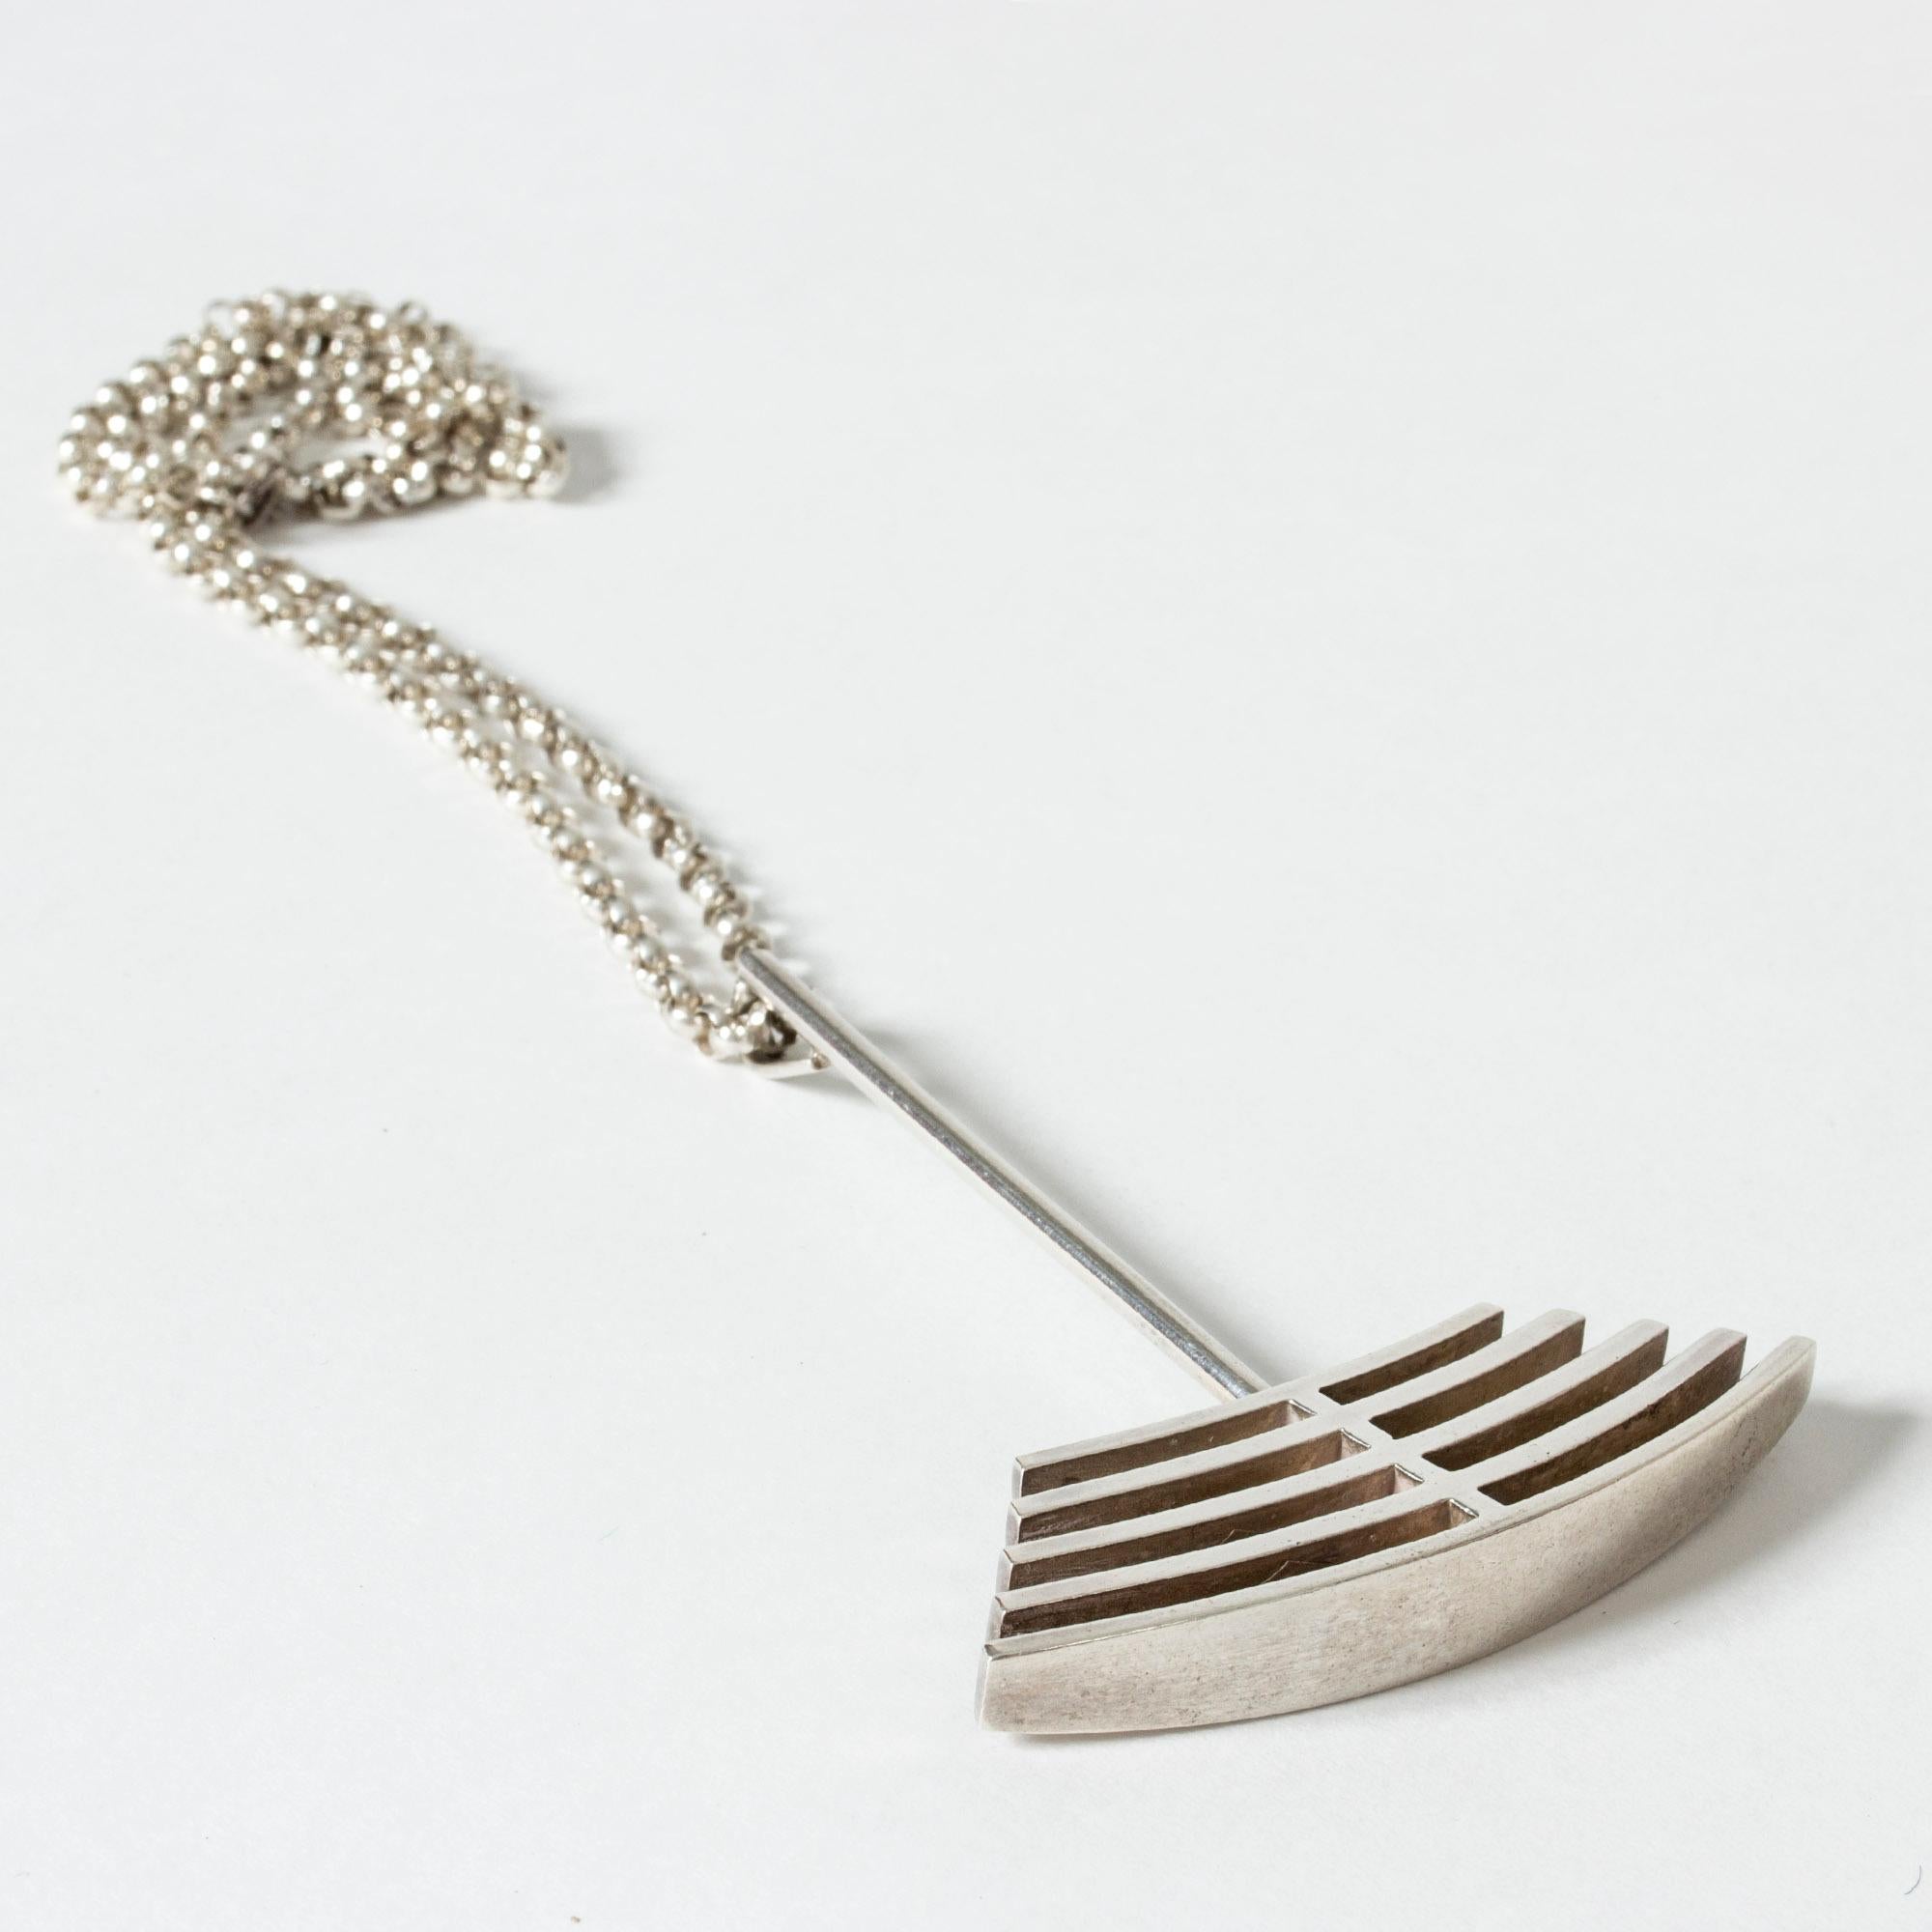 Striking silver pendant by Arne Johansen, in a graphic anchor like design. Heavy silver quality.